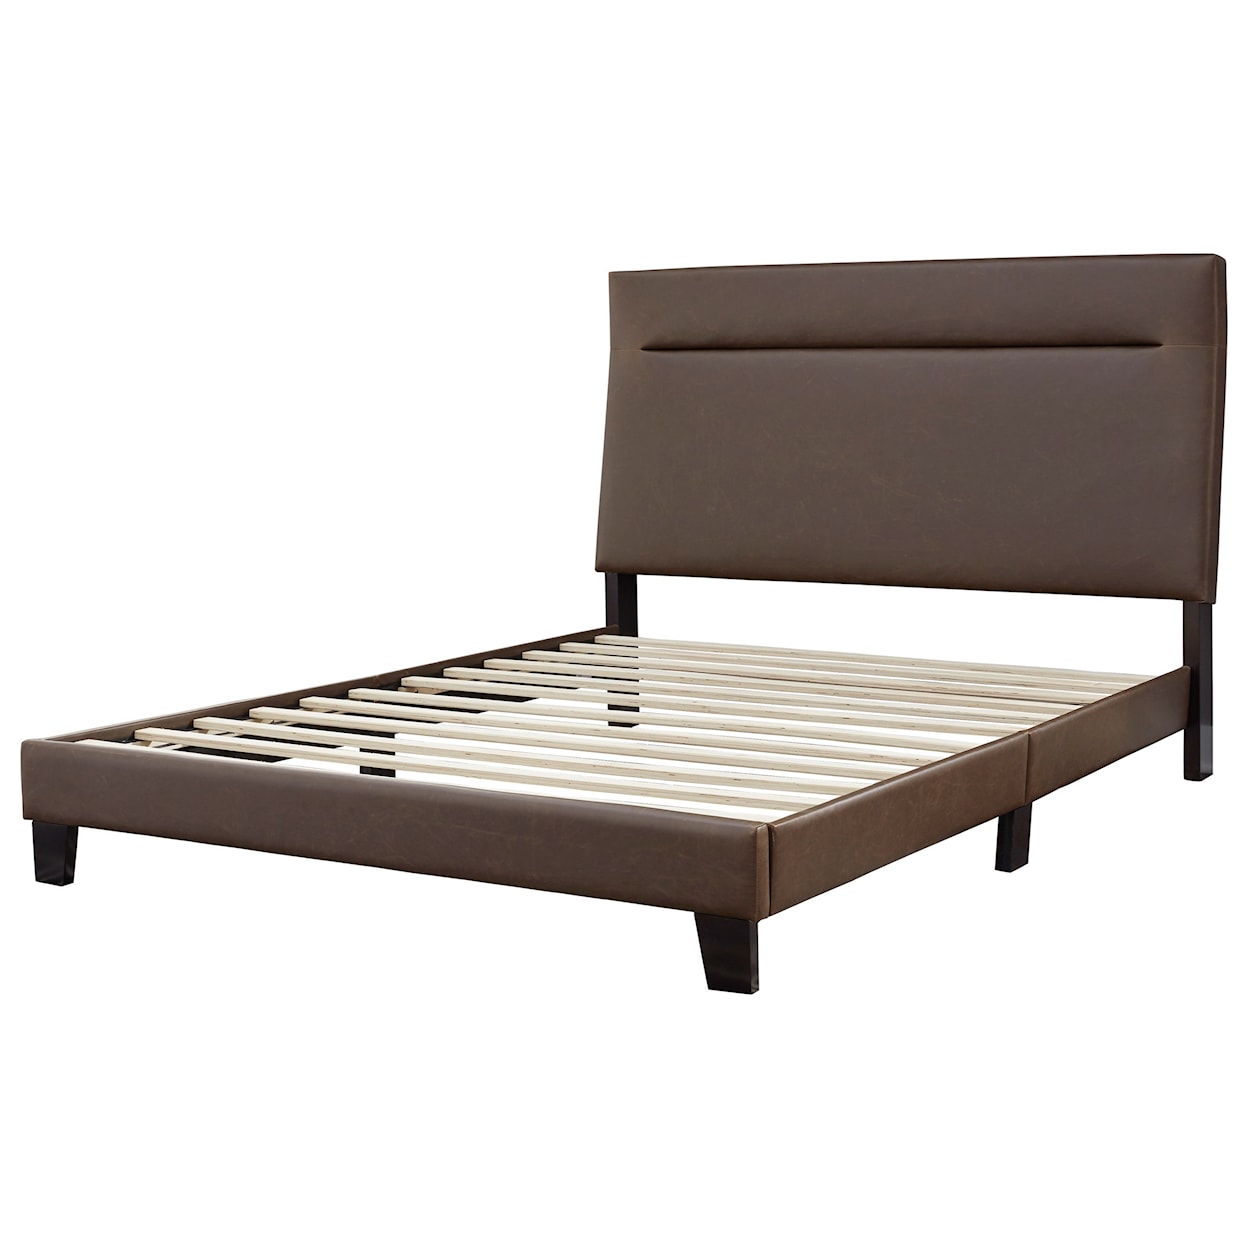 Ashley Furniture Signature Design Adelloni Queen Upholstered Bed